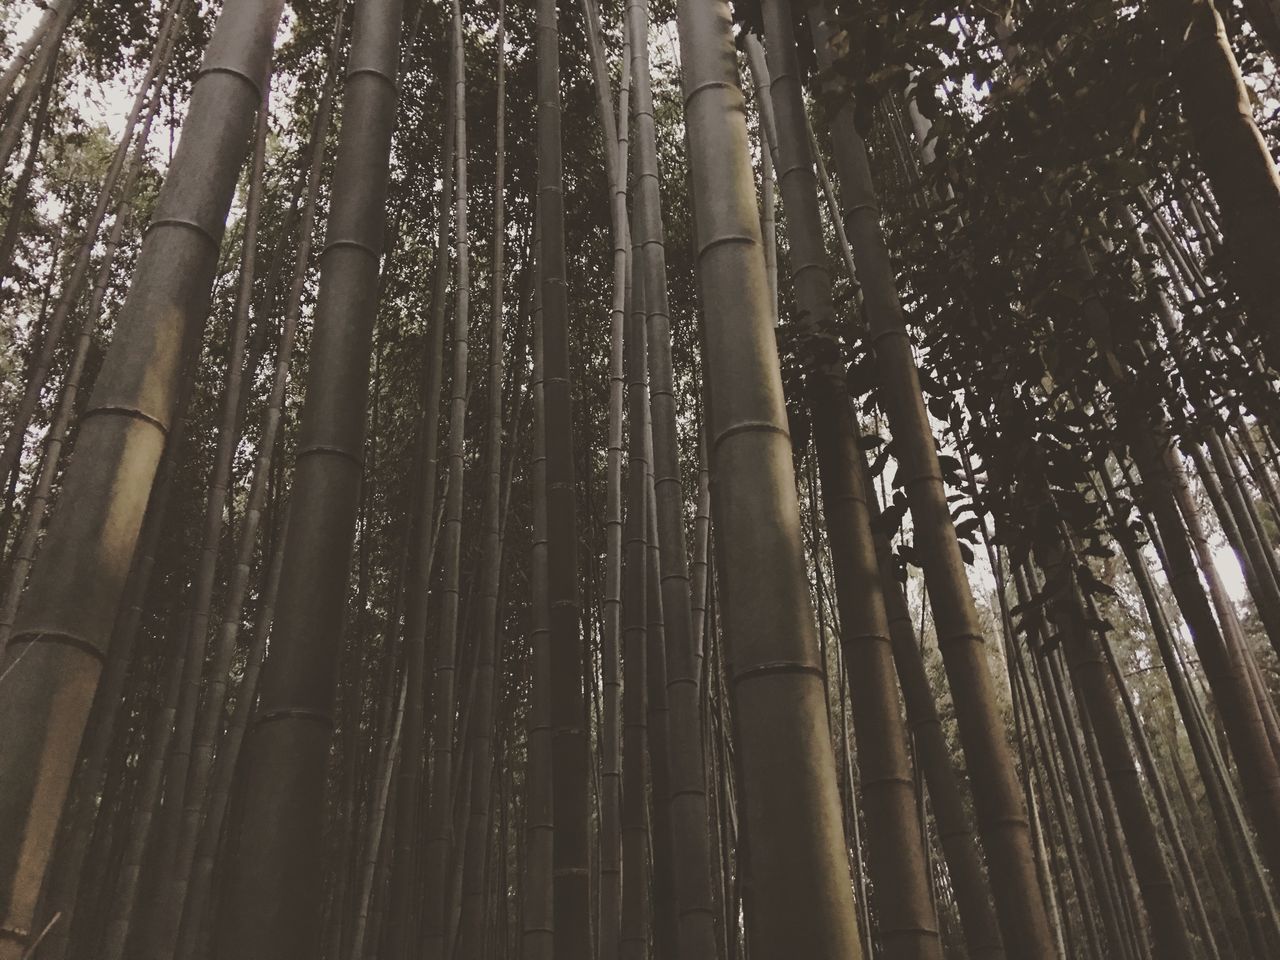 tree, forest, sunlight, low angle view, plant, land, no people, branch, bamboo - plant, tree trunk, trunk, woodland, growth, nature, tranquility, bamboo, bamboo grove, natural environment, beauty in nature, day, outdoors, full frame, scenics - nature